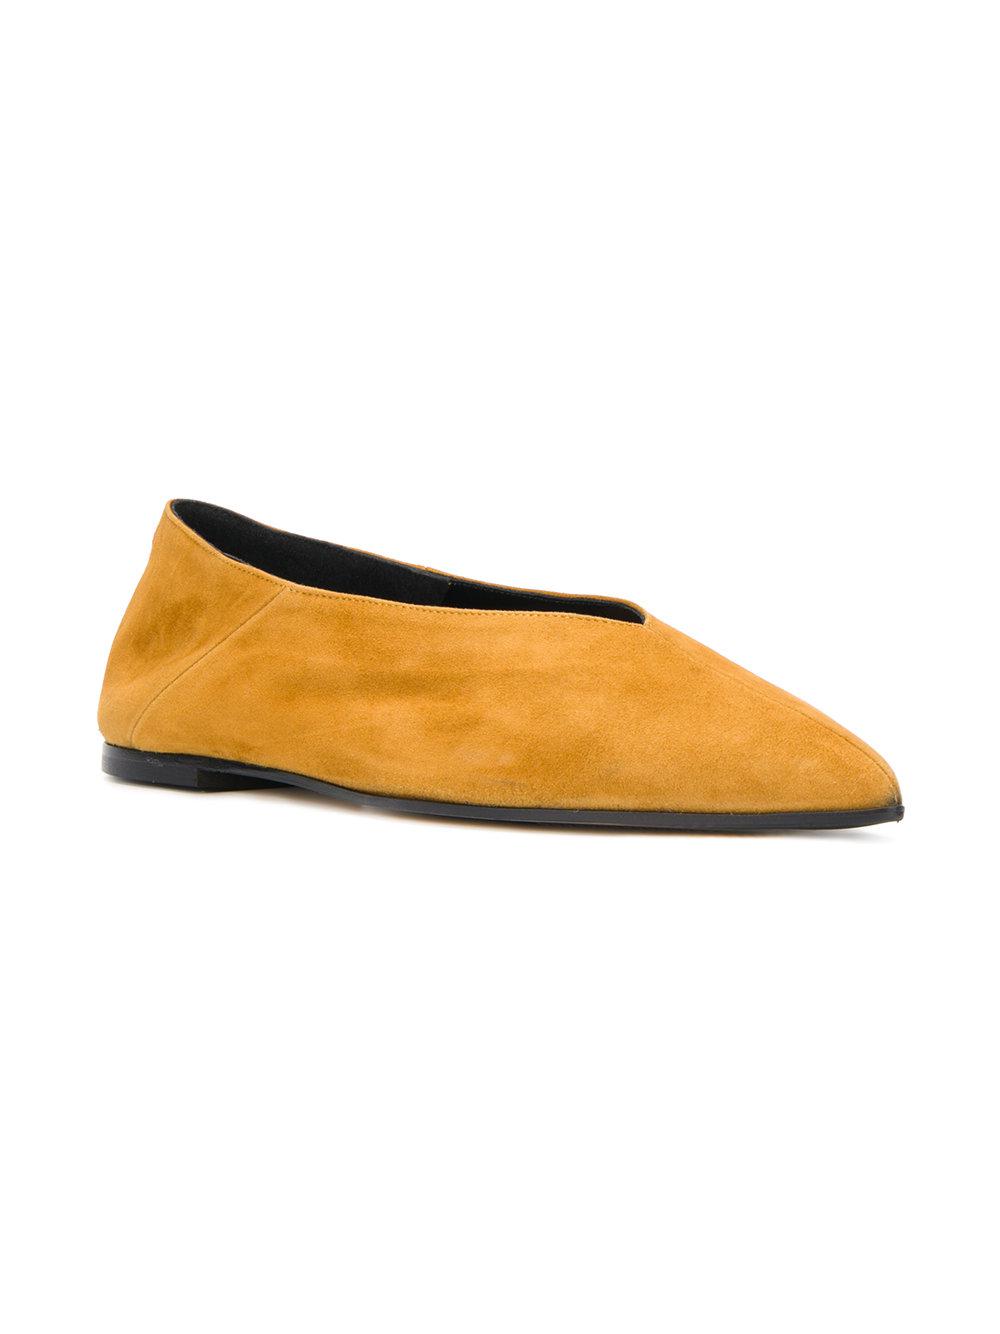 Aeyde Suede Flat Pointed Ballerina Shoes in Orange - Lyst